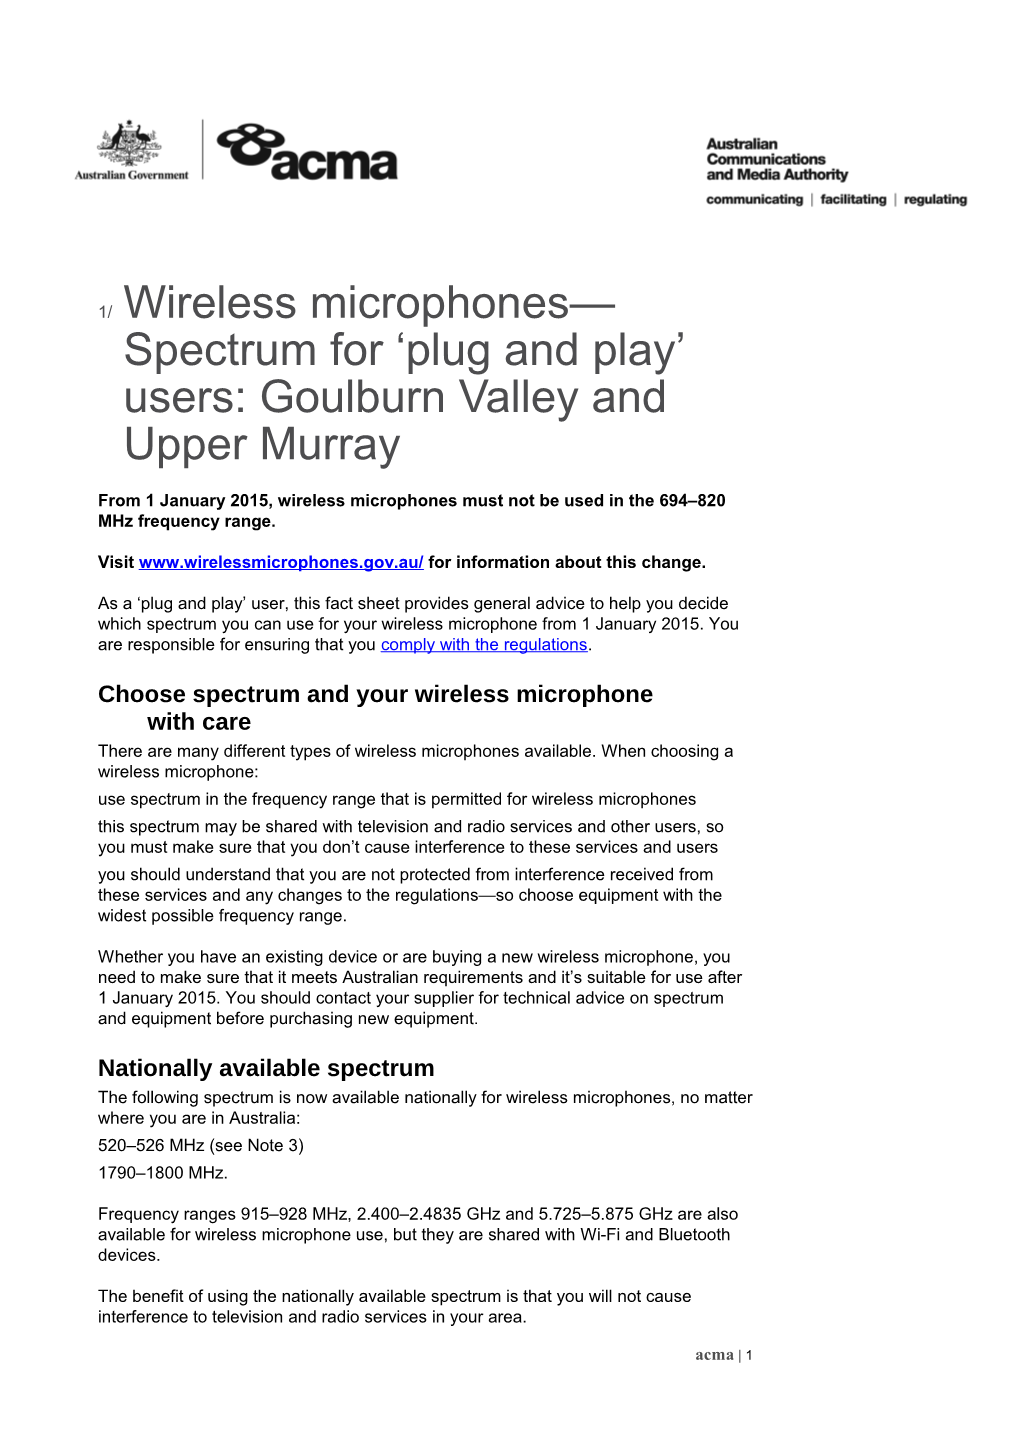 Wireless Microphones Spectrum for Plug and Play Users: Goulburn Valley and Upper Murray